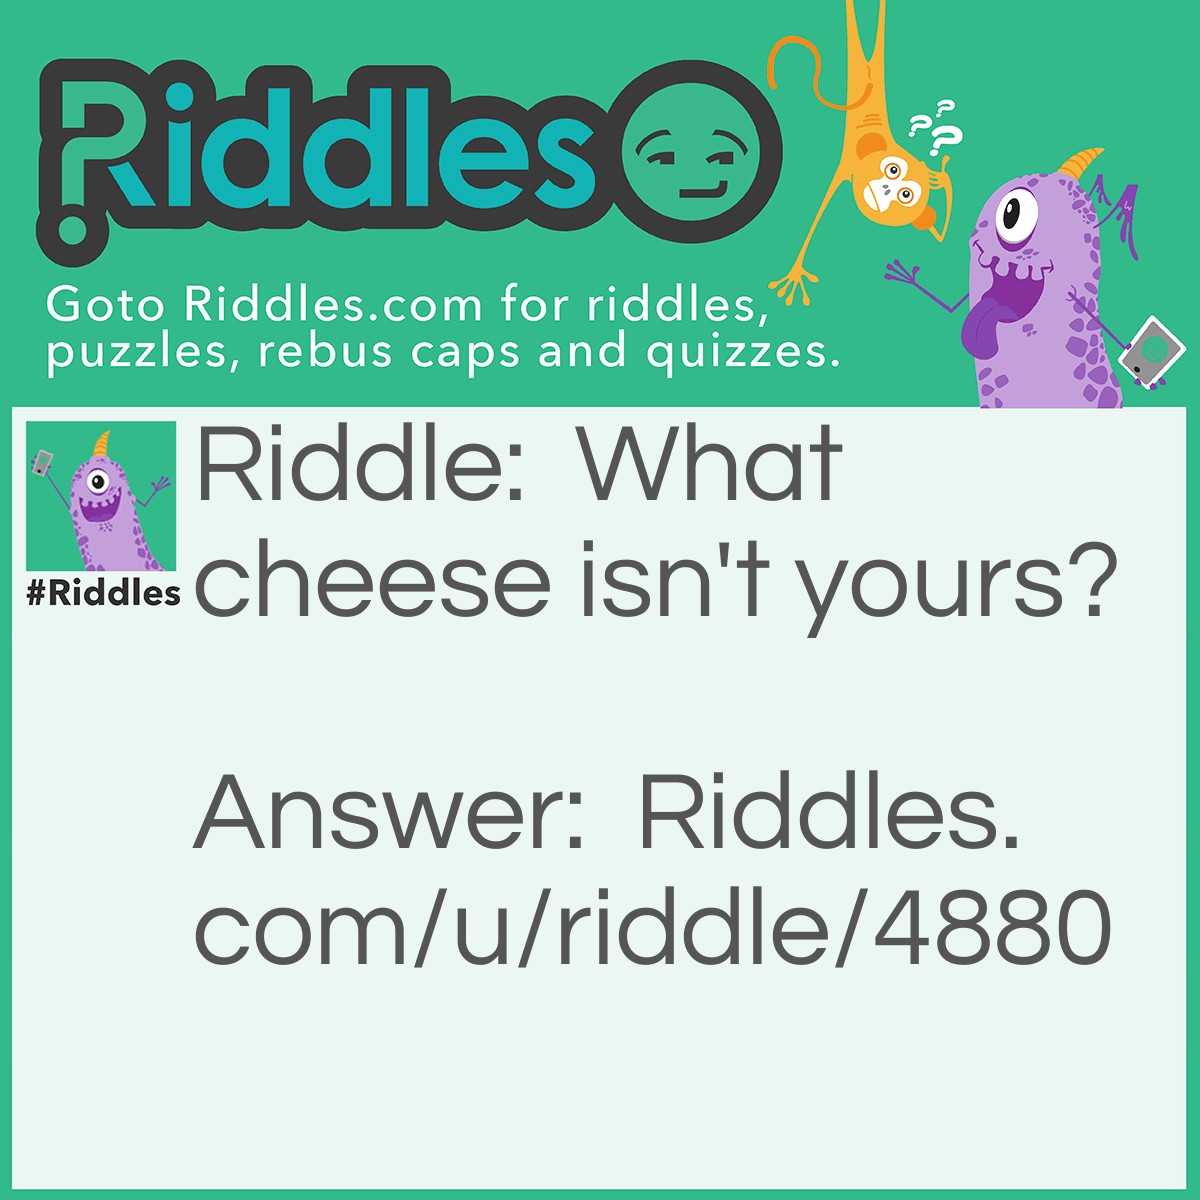 Riddle: What cheese isn't yours? Answer: Nacho cheese (not yo cheese).